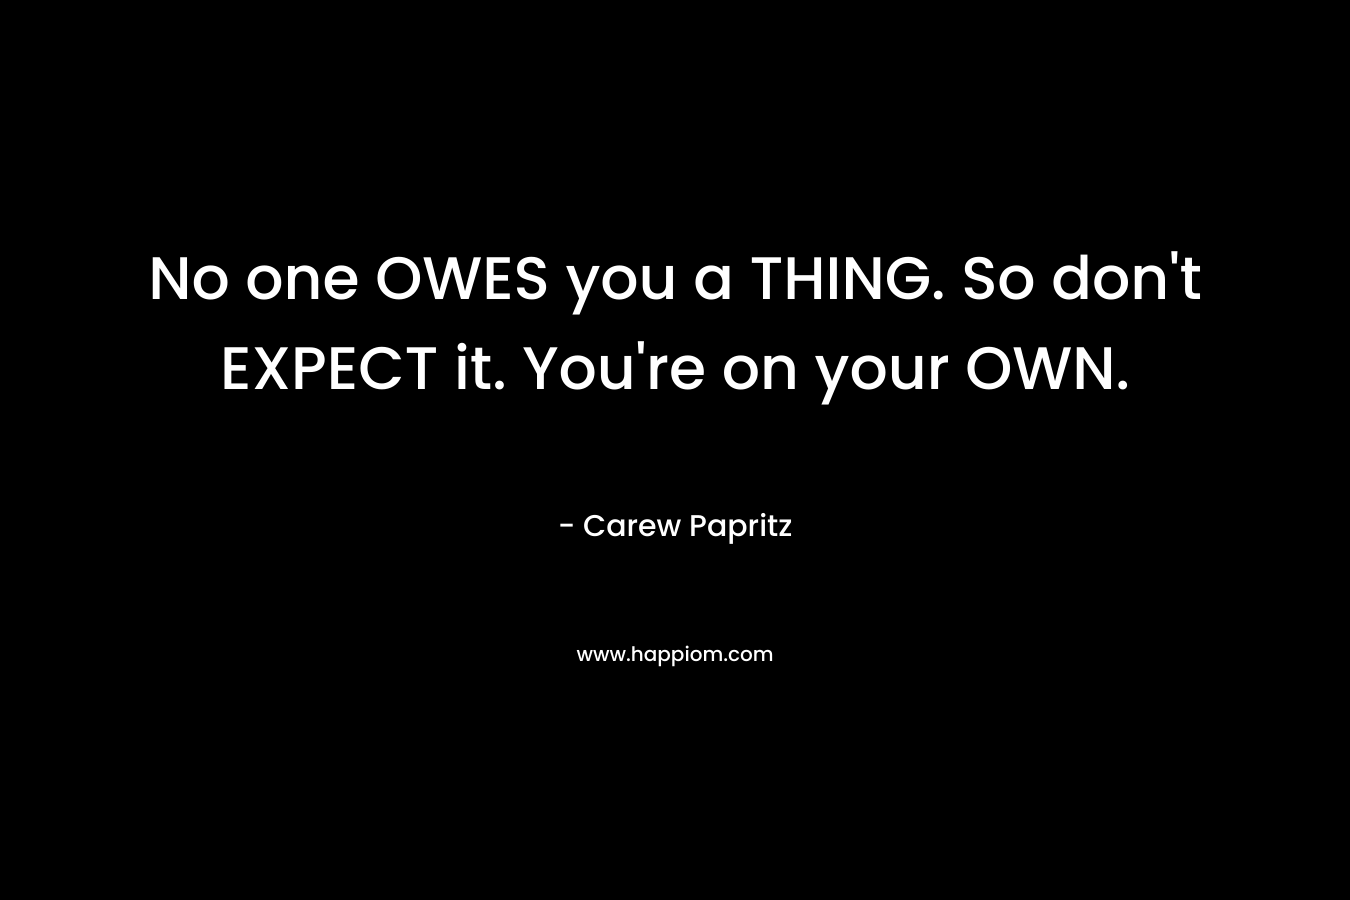 No one OWES you a THING. So don’t EXPECT it. You’re on your OWN. – Carew Papritz